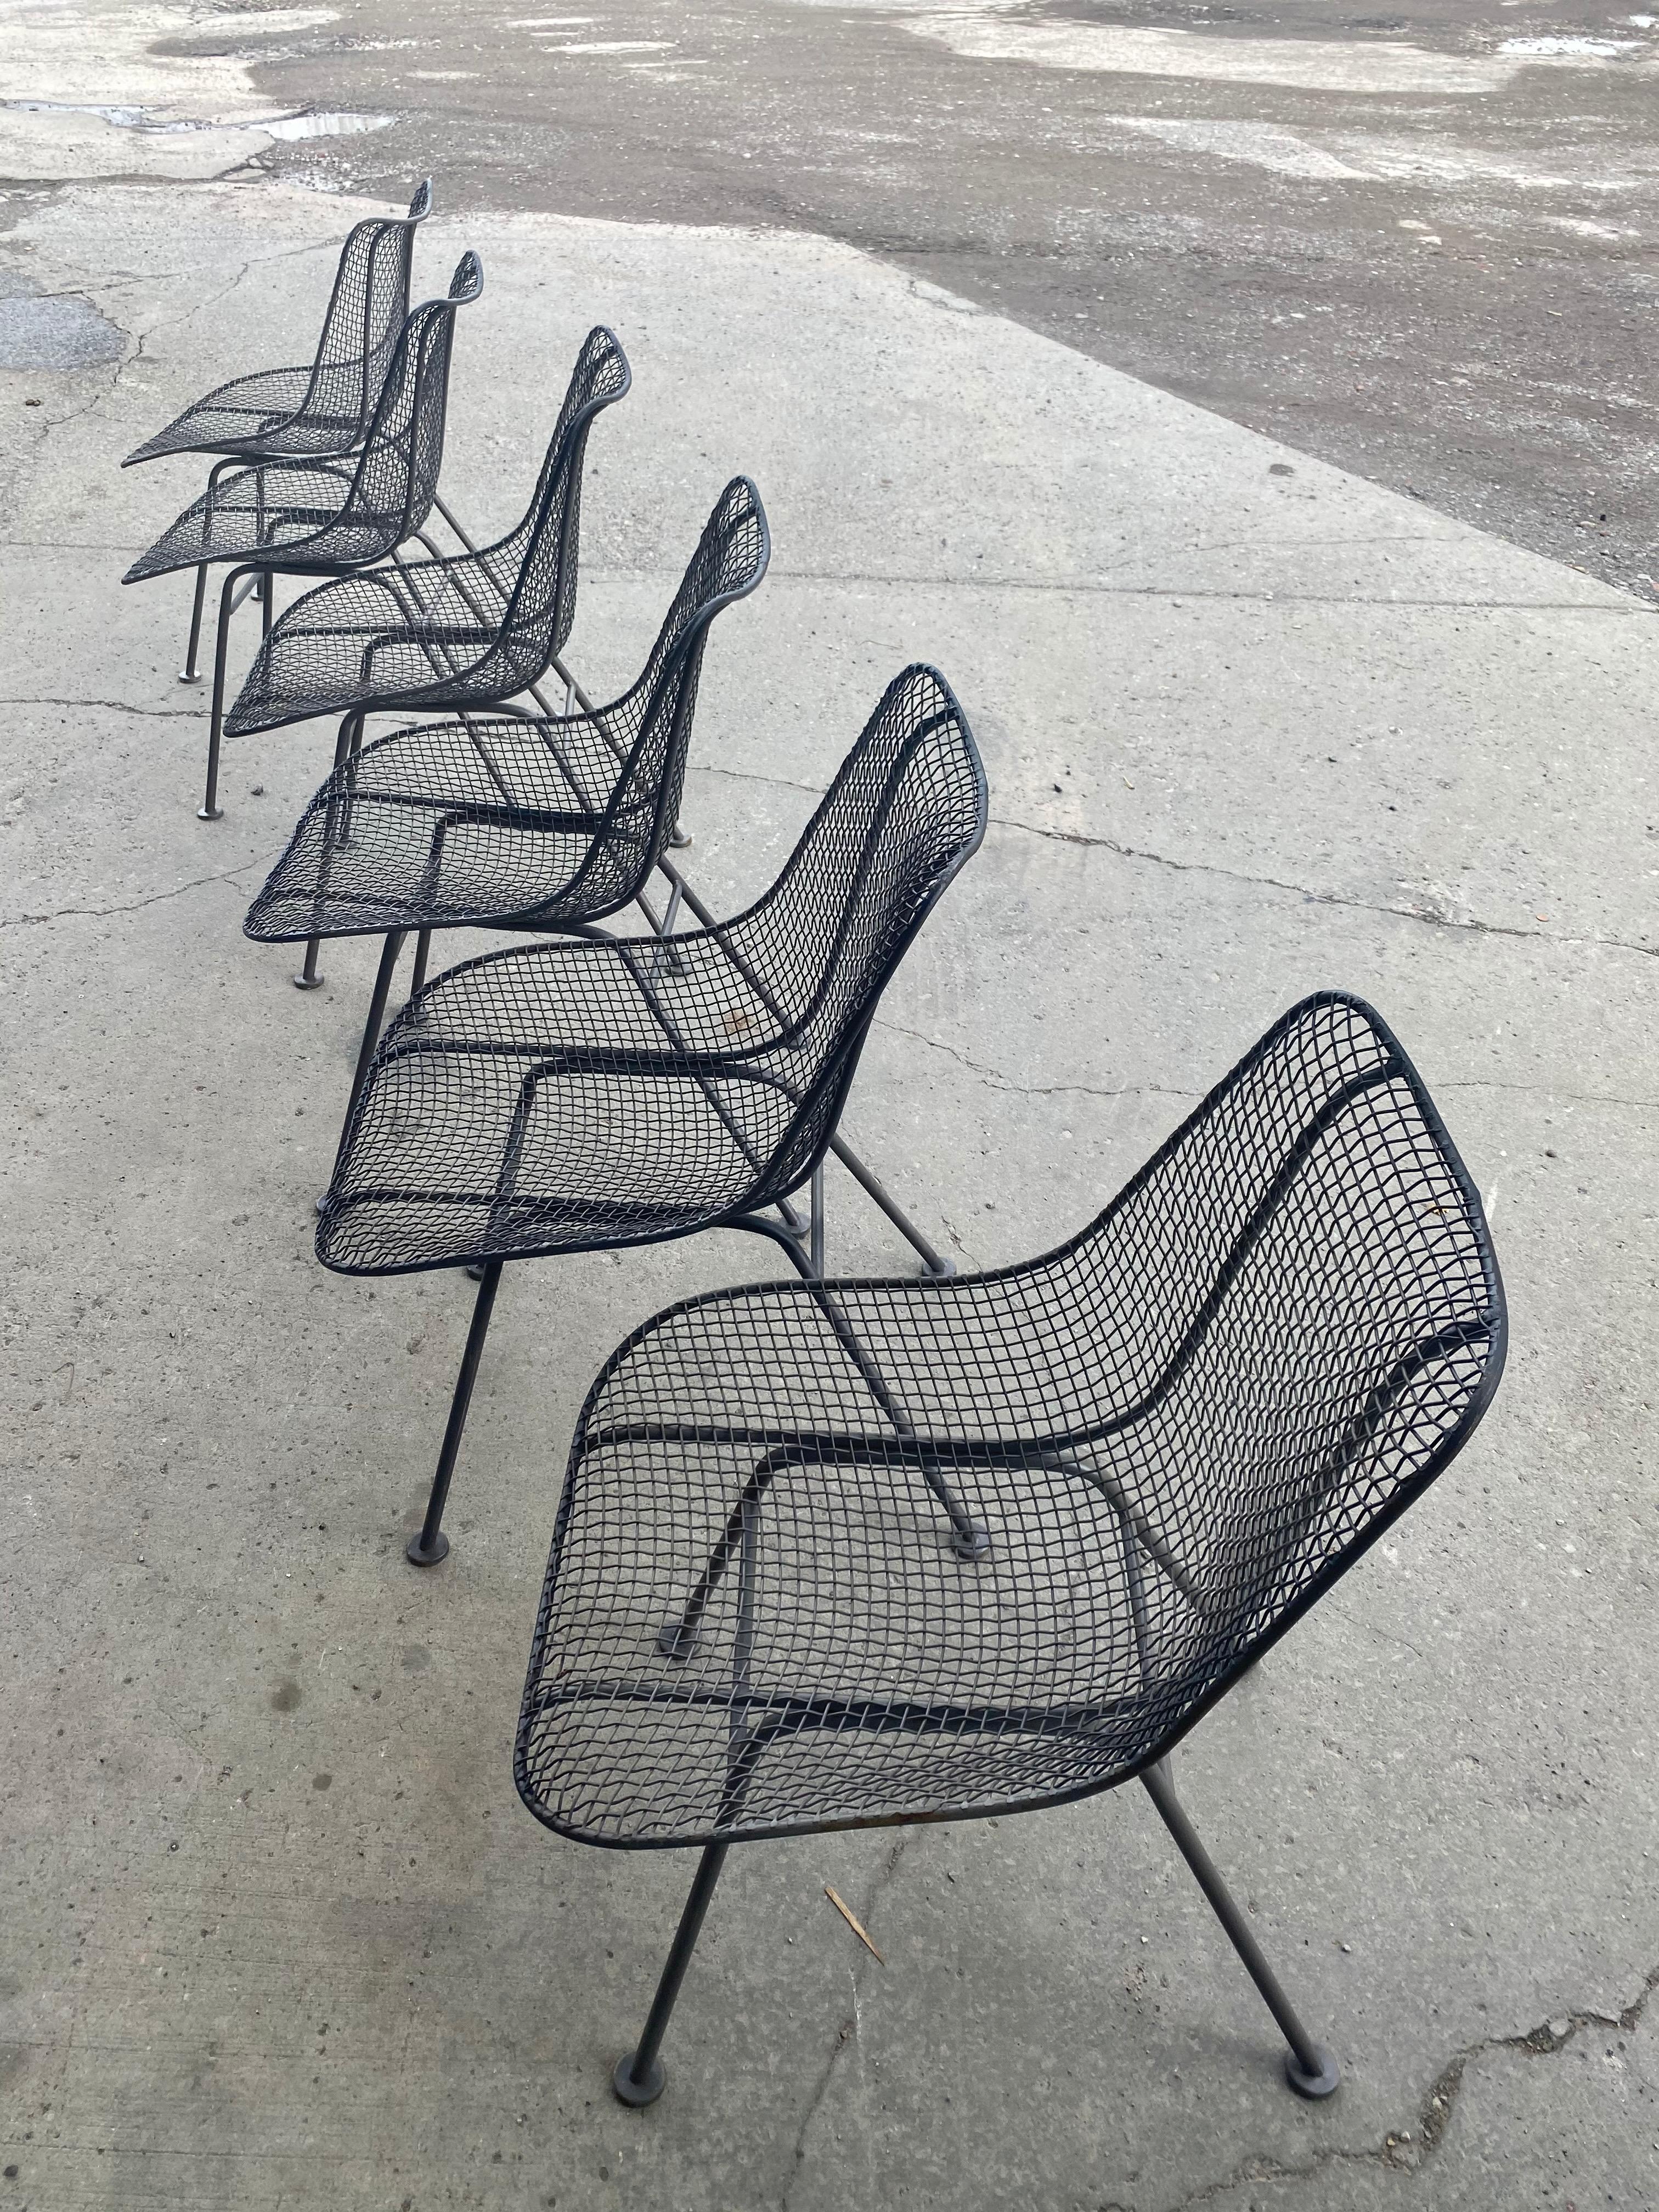 Set of 6 Modernist Russell Woodard sculptura side chairs, outdoor garden, iron mesh and steel. Retain original dark grey finish, amazing original condition, Hand delivery avail to New York City or anywhere en route from Buffalo NY.